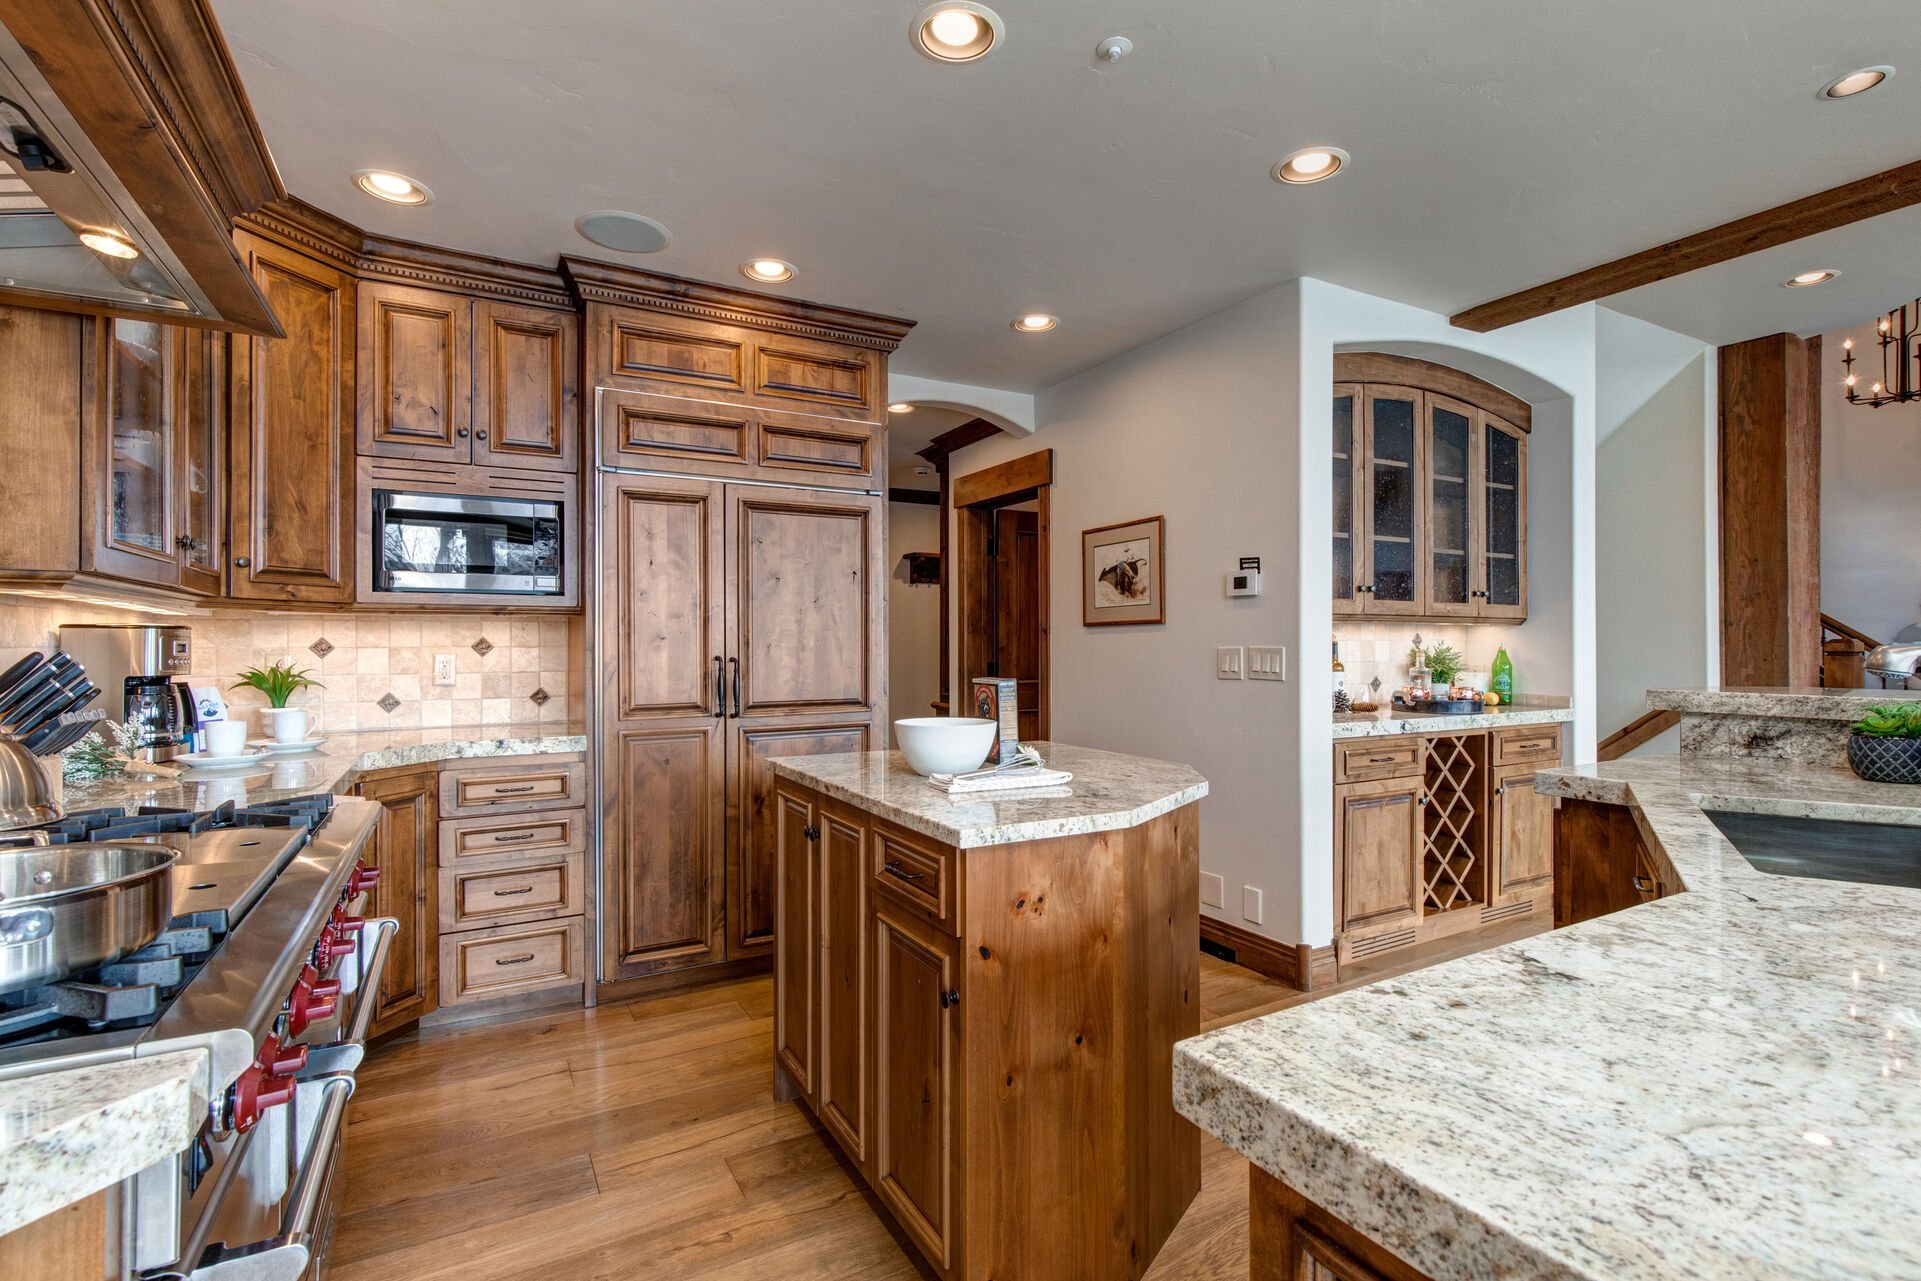 Fully Equipped Kitchen with stainless steel Wolff appliances, sub-zero fridge, double ovens, gorgeous stone countertops, separate island, and bar seating for 5